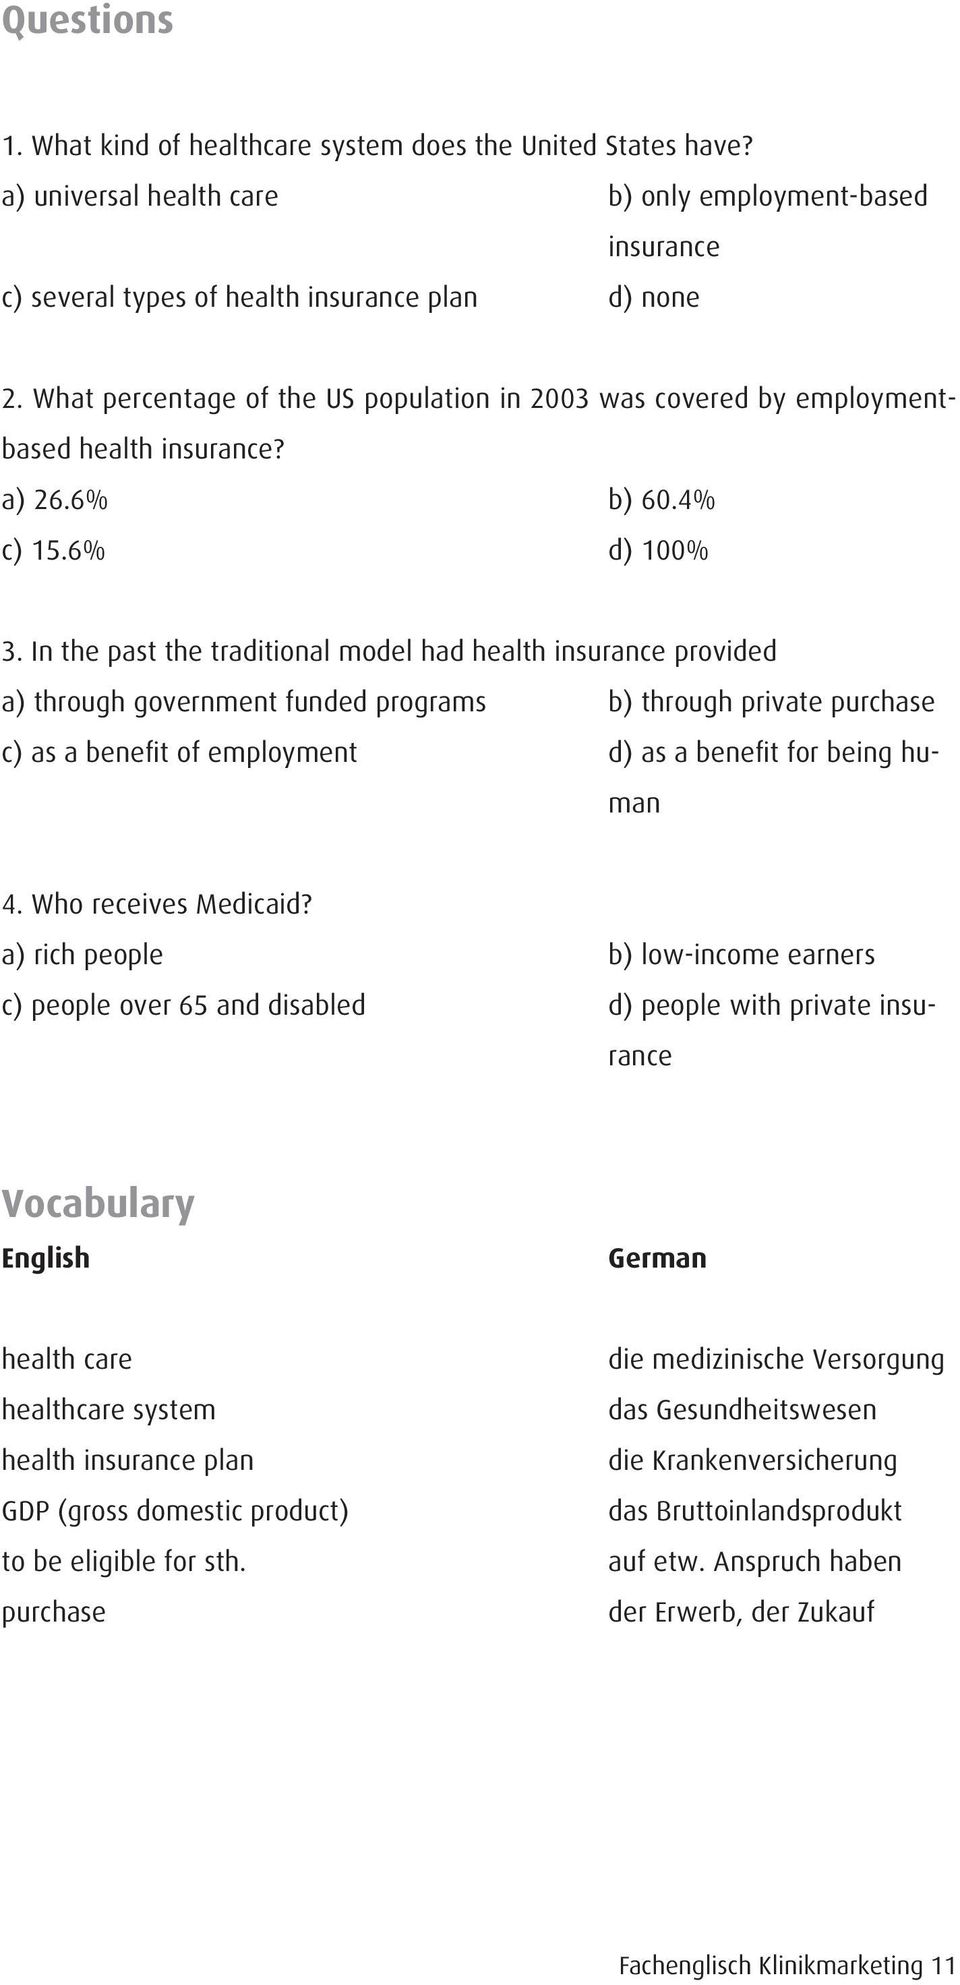 In the past the traditional model had health insurance provided a) through government funded programs b) through private purchase c) as a benefit of employment d) as a benefit for being human 4.